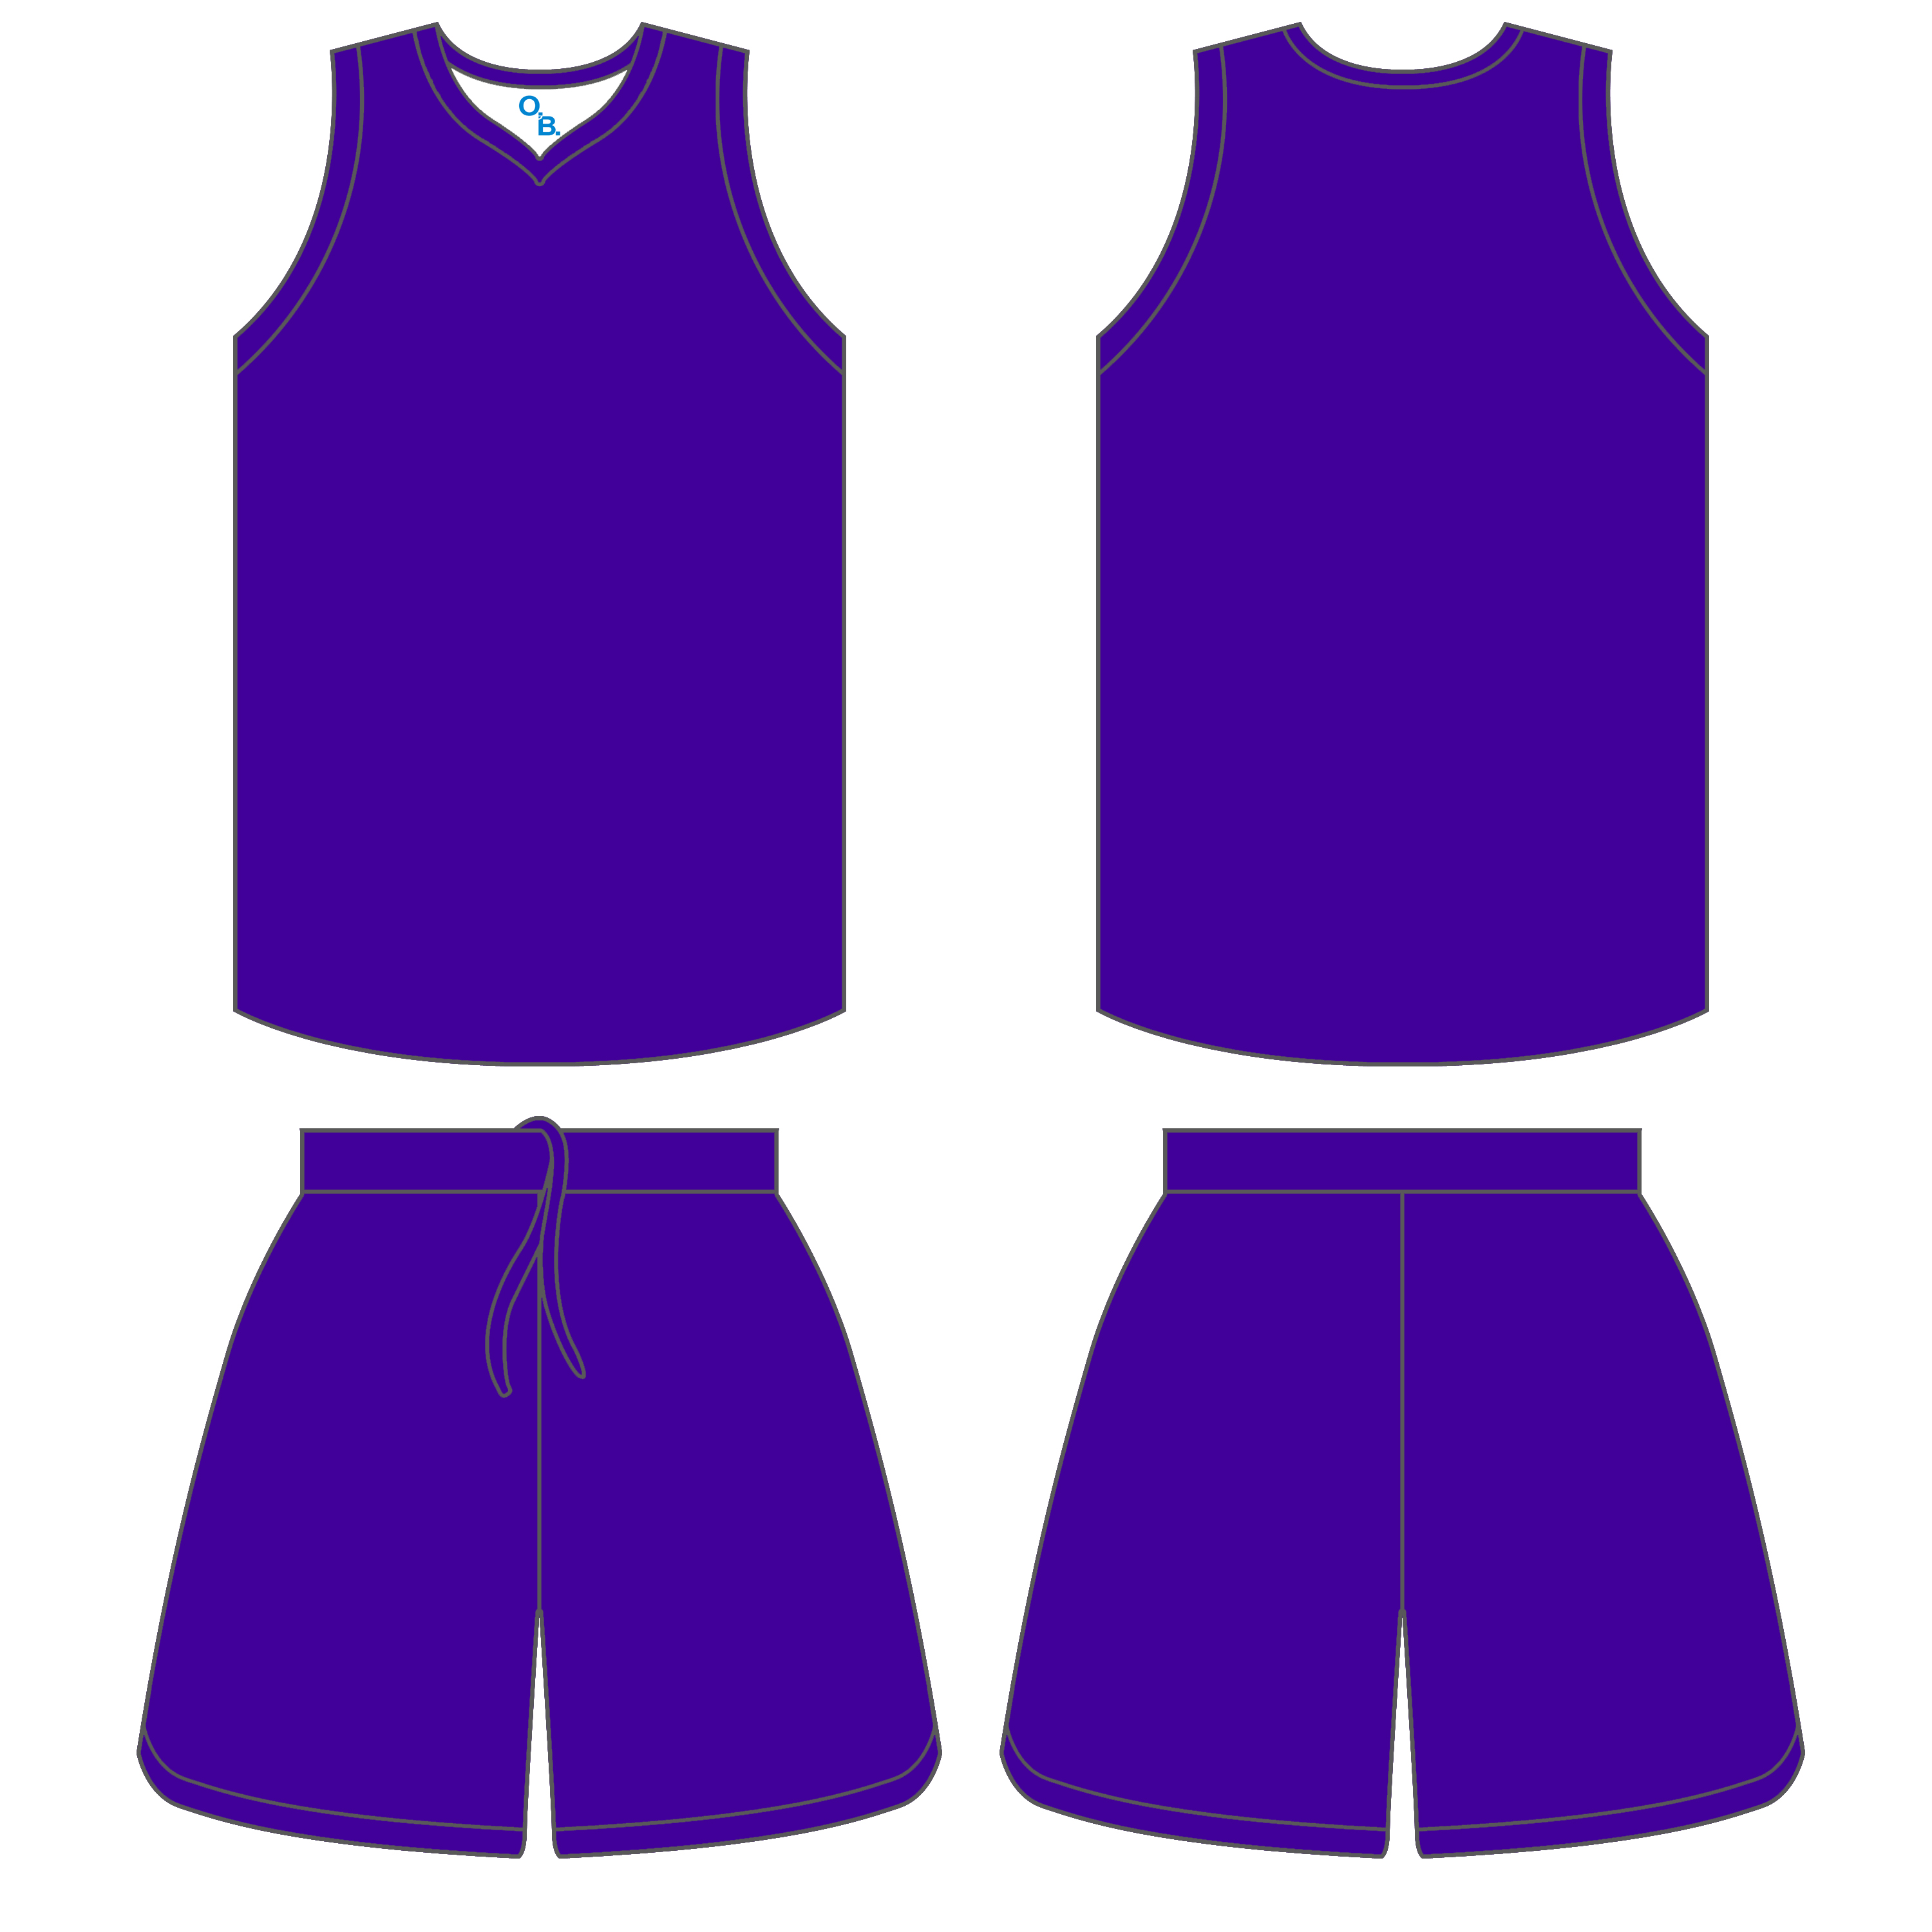 Blank Basketball Jersey Template Cliparts.co